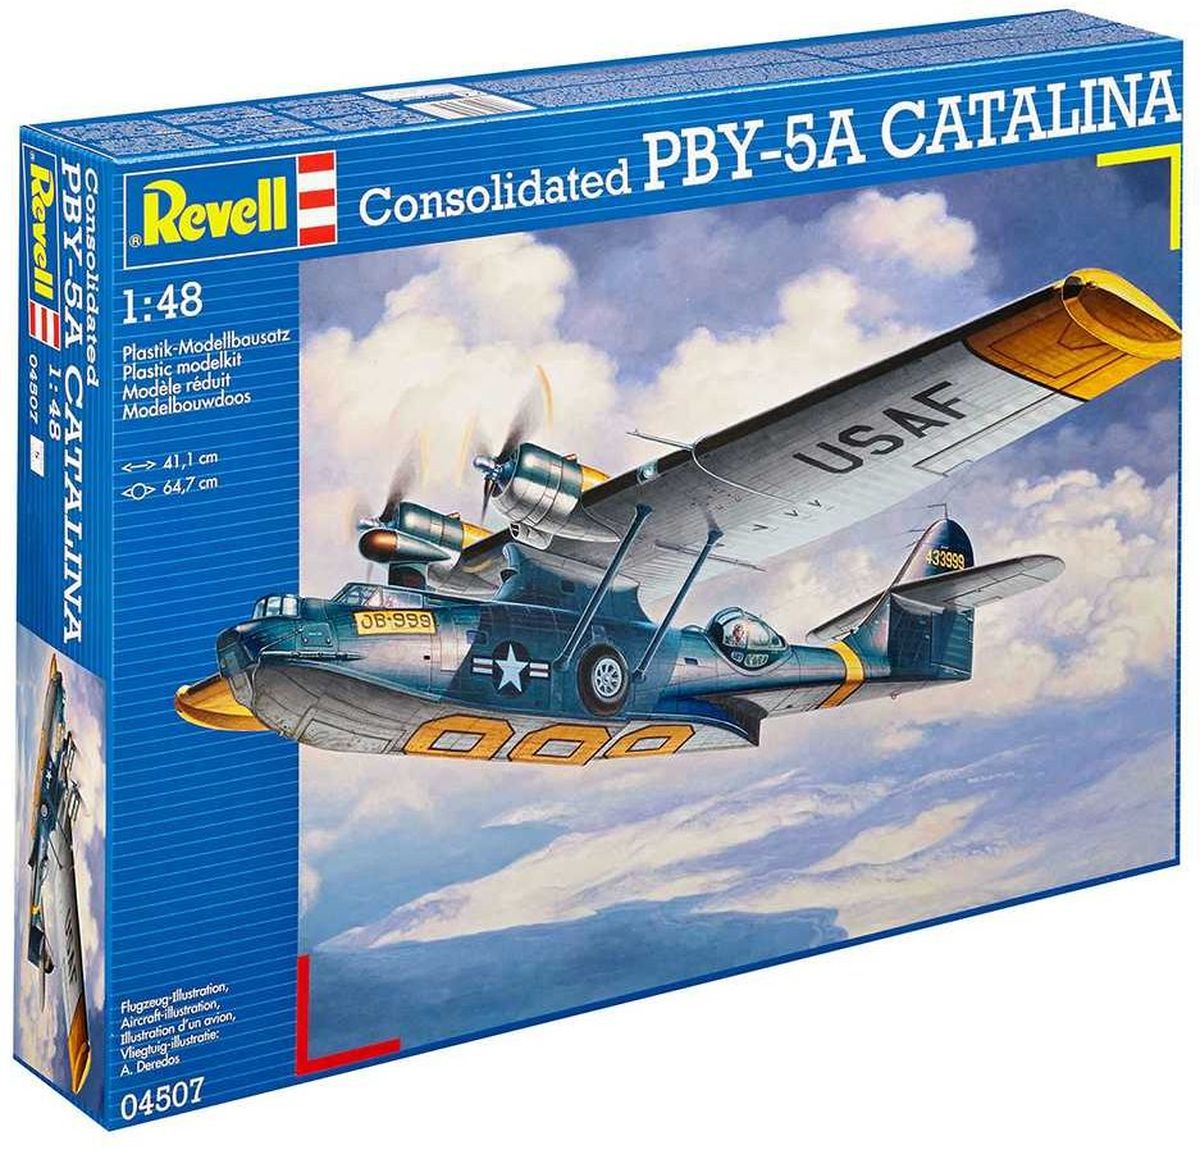 Revell    PBY-5A Catalina - Revell04507R    Revell  PBY-5A Catalina          .     162    ,    .               . PBY-5A     22  1939 .  1941        .            .      , ,  , ,       1950- .    3272 ,        .           .       ,   ...